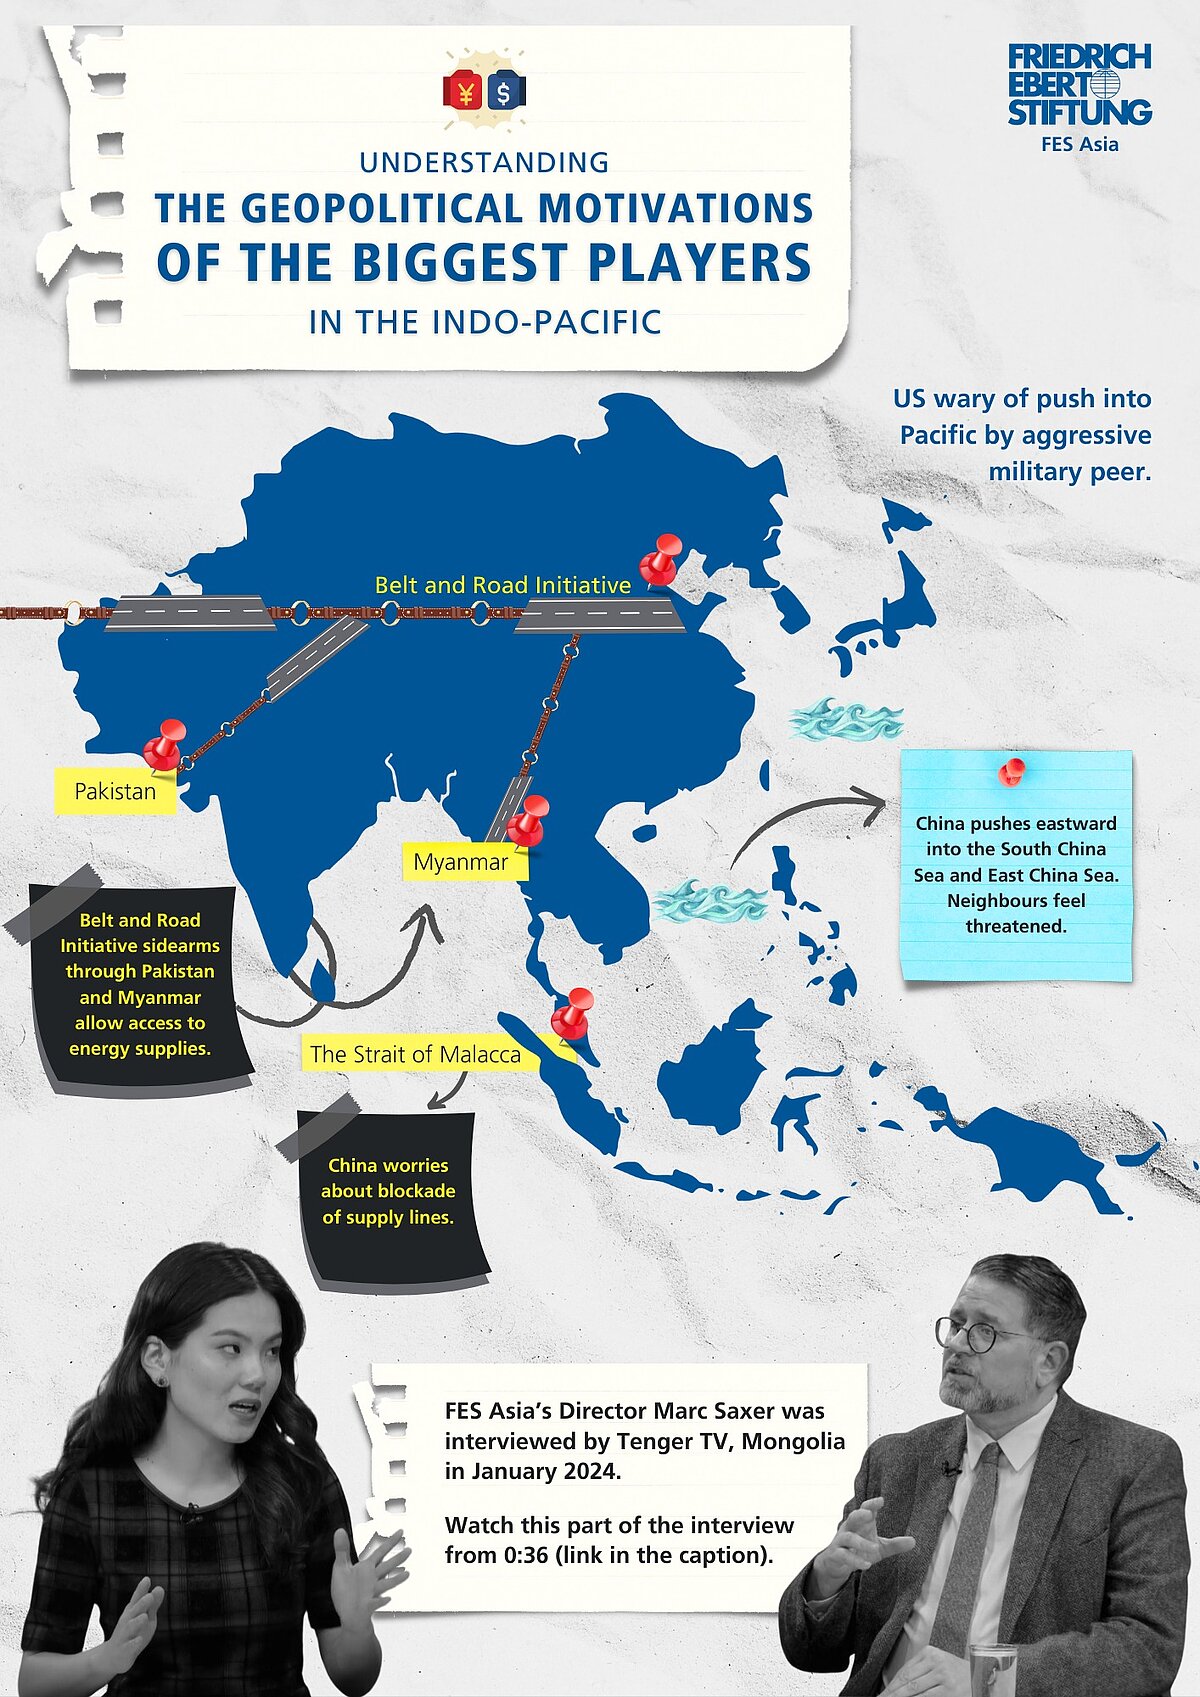 an infographic image about geopolitics